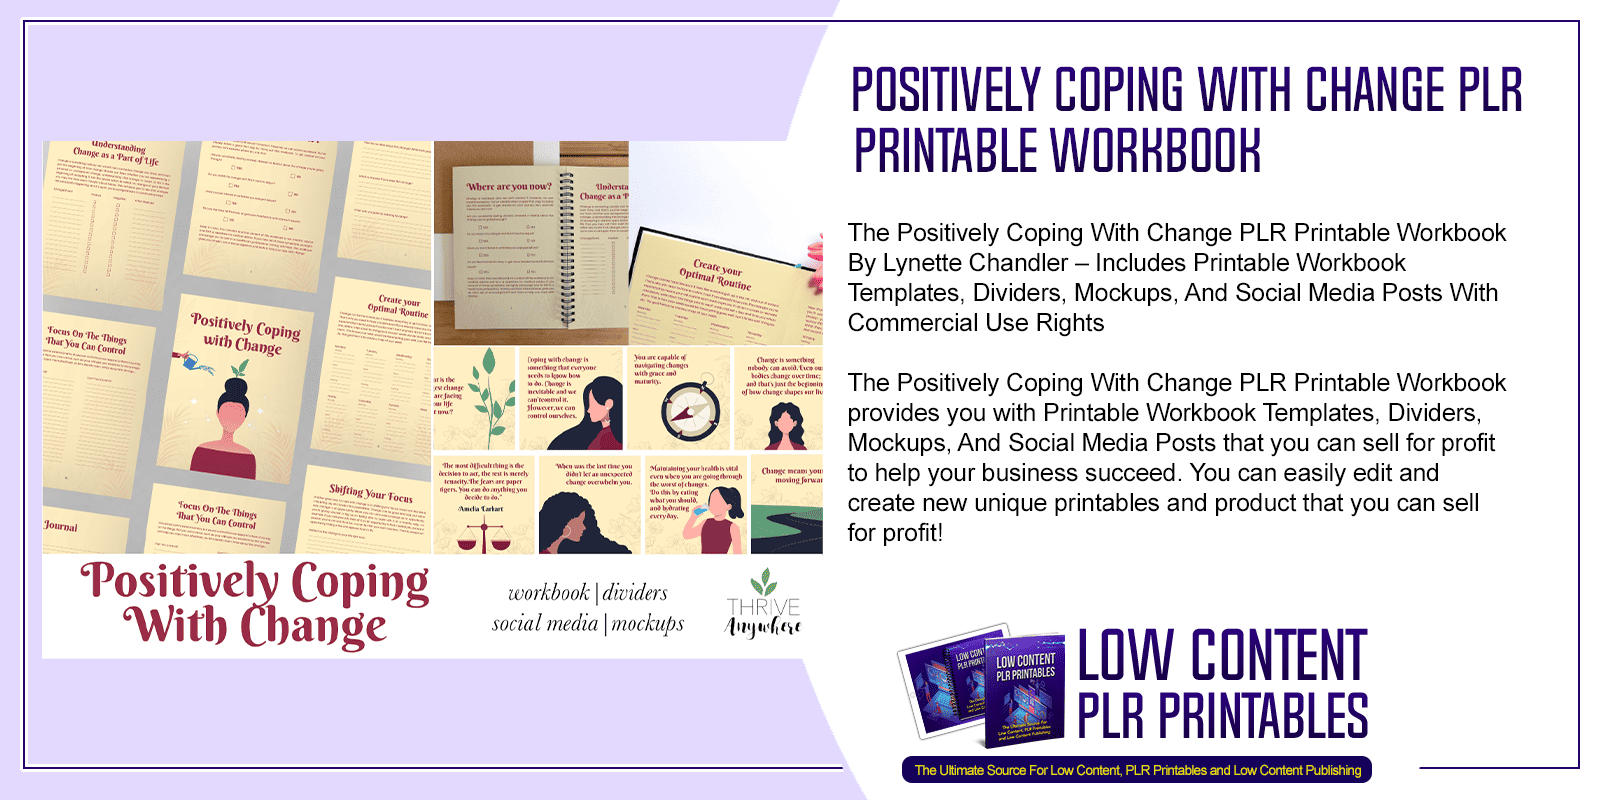 Positively Coping With Change PLR Printable Workbook